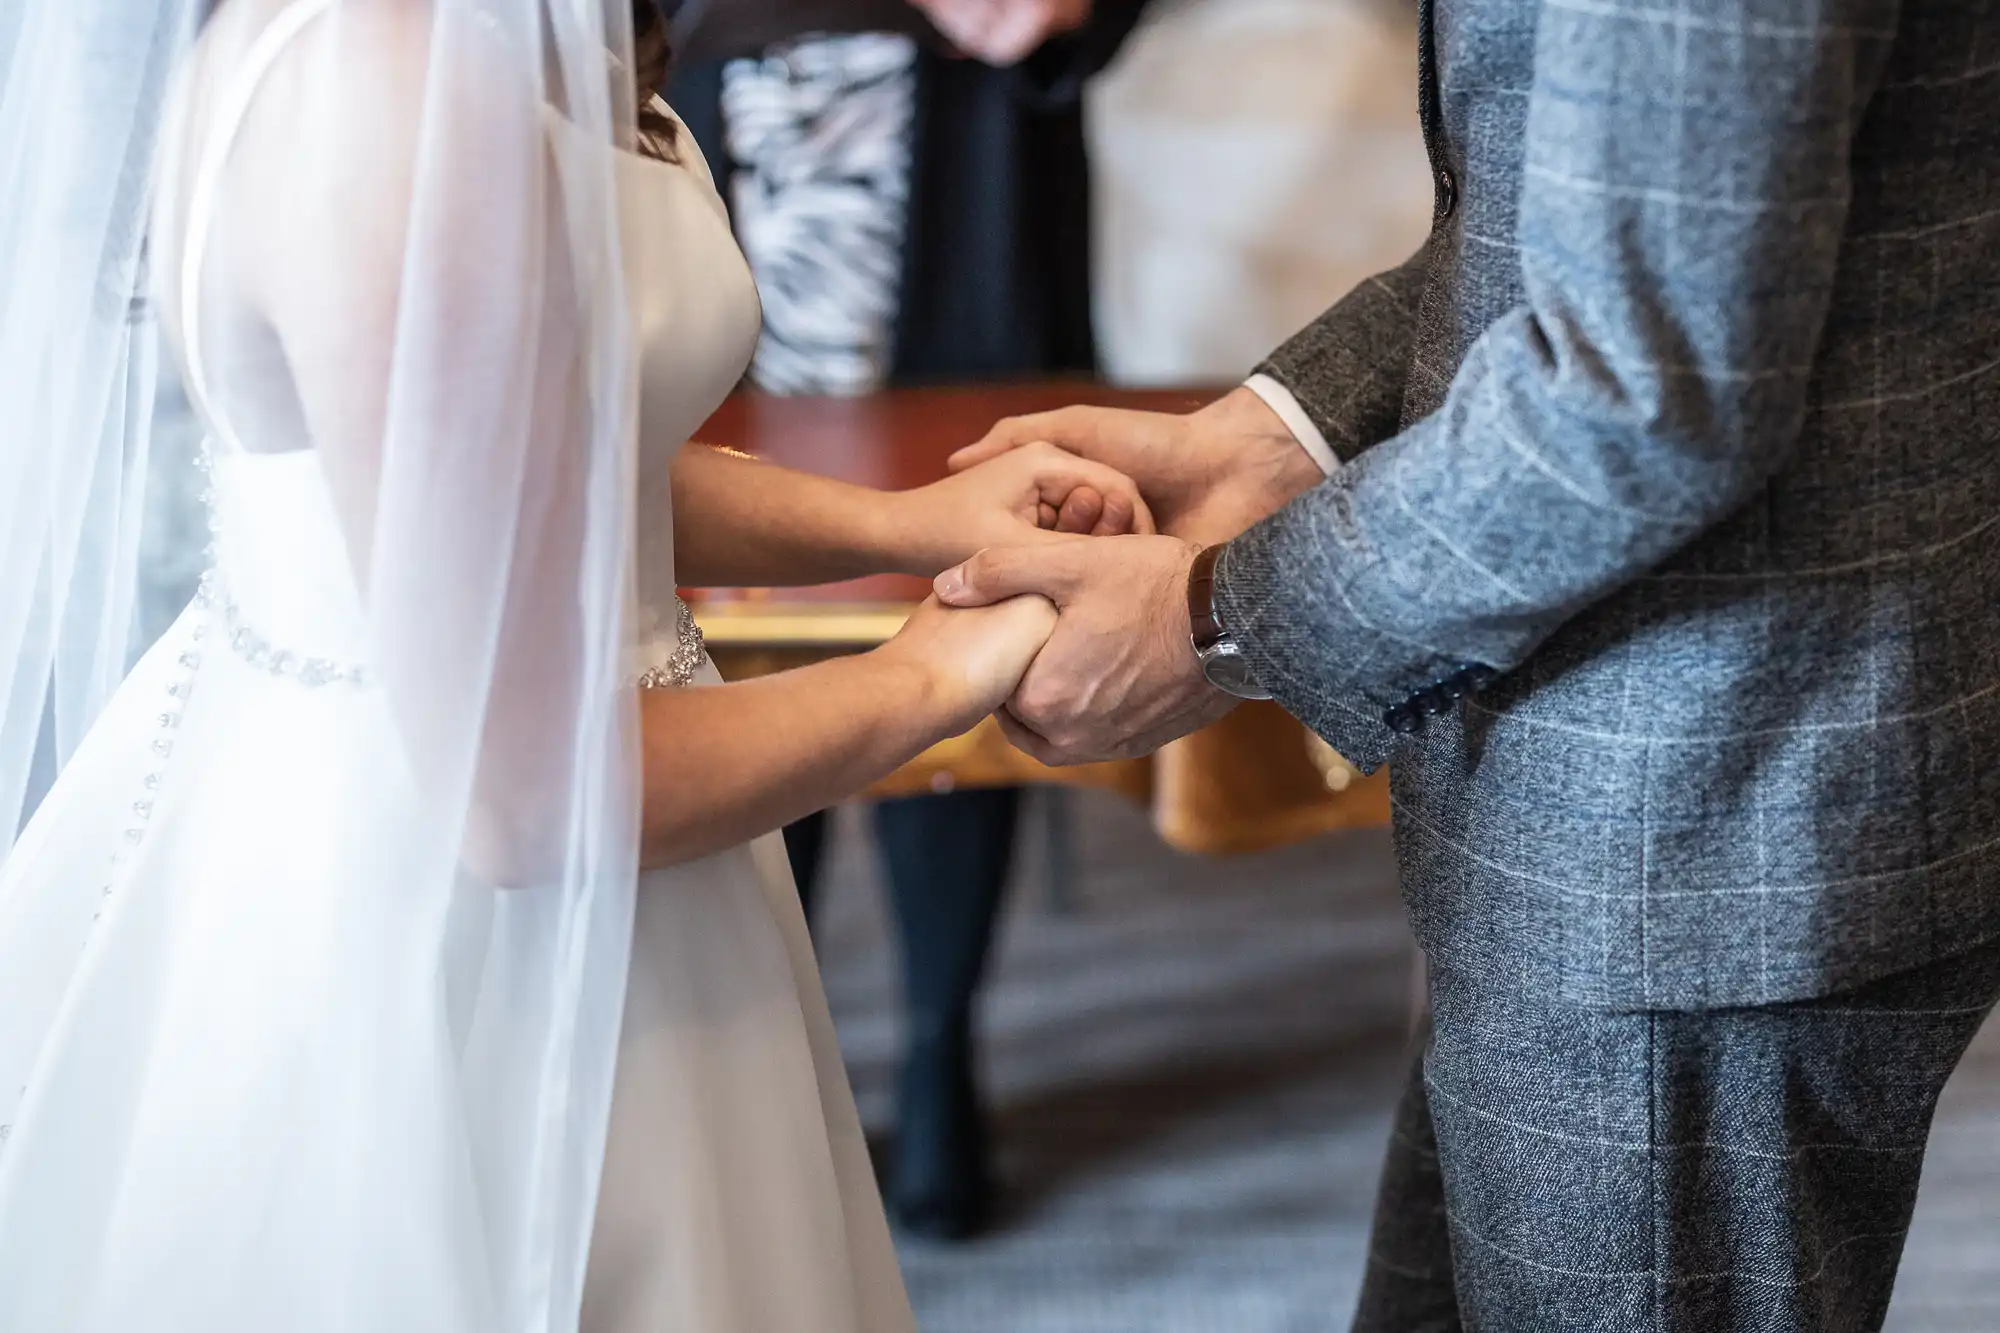 A bride in a white dress and a groom in a gray suit hold hands during a wedding ceremony.